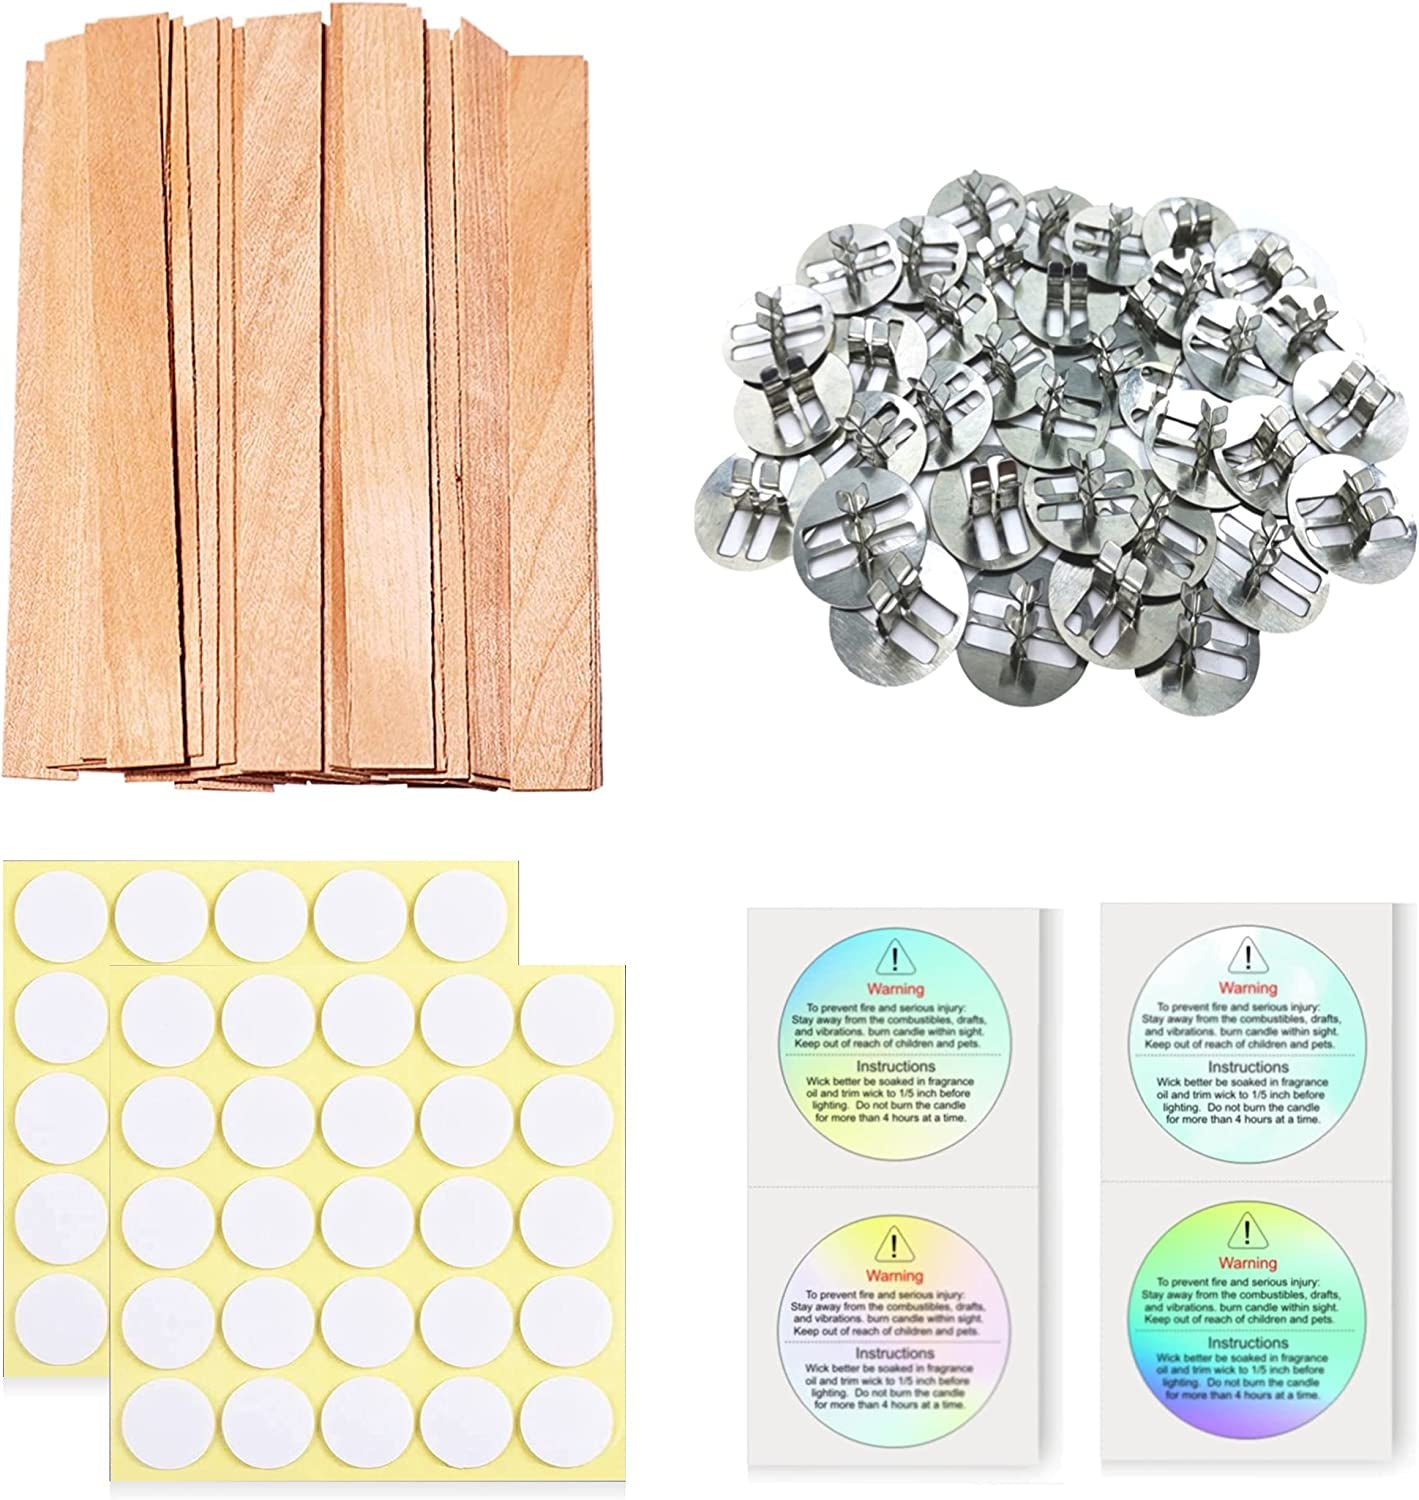 200 Pcs Thickned Wooden Candle Wicks. 5.1 X 0.5 X 0.04 Inch Natural Crackling Wicks, Long Lasting Smokeless Wood Wicks with Iron Standers, Wick Stickers, and Warning Labels- 50 Sets